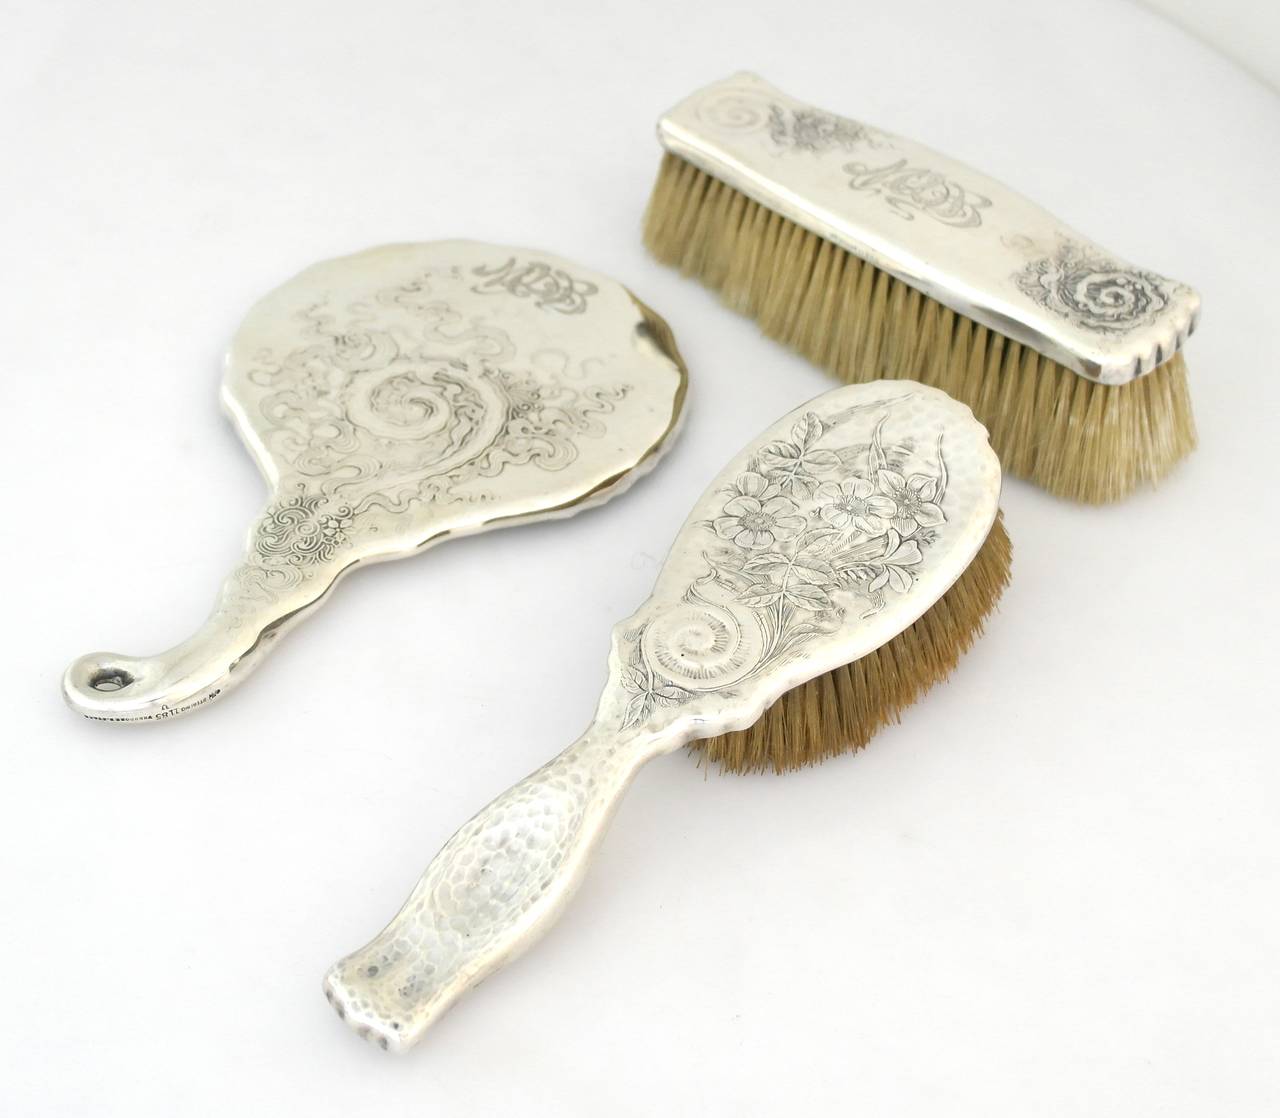 Being offered are a circa 1888 sterling silver 3 piece grooming dresser set by Whiting of New York. Comprising a hand mirror & two brushes (clothing and hair), all with acid-etched floral, scroll & spiral motifs; one brush has delicate hammered